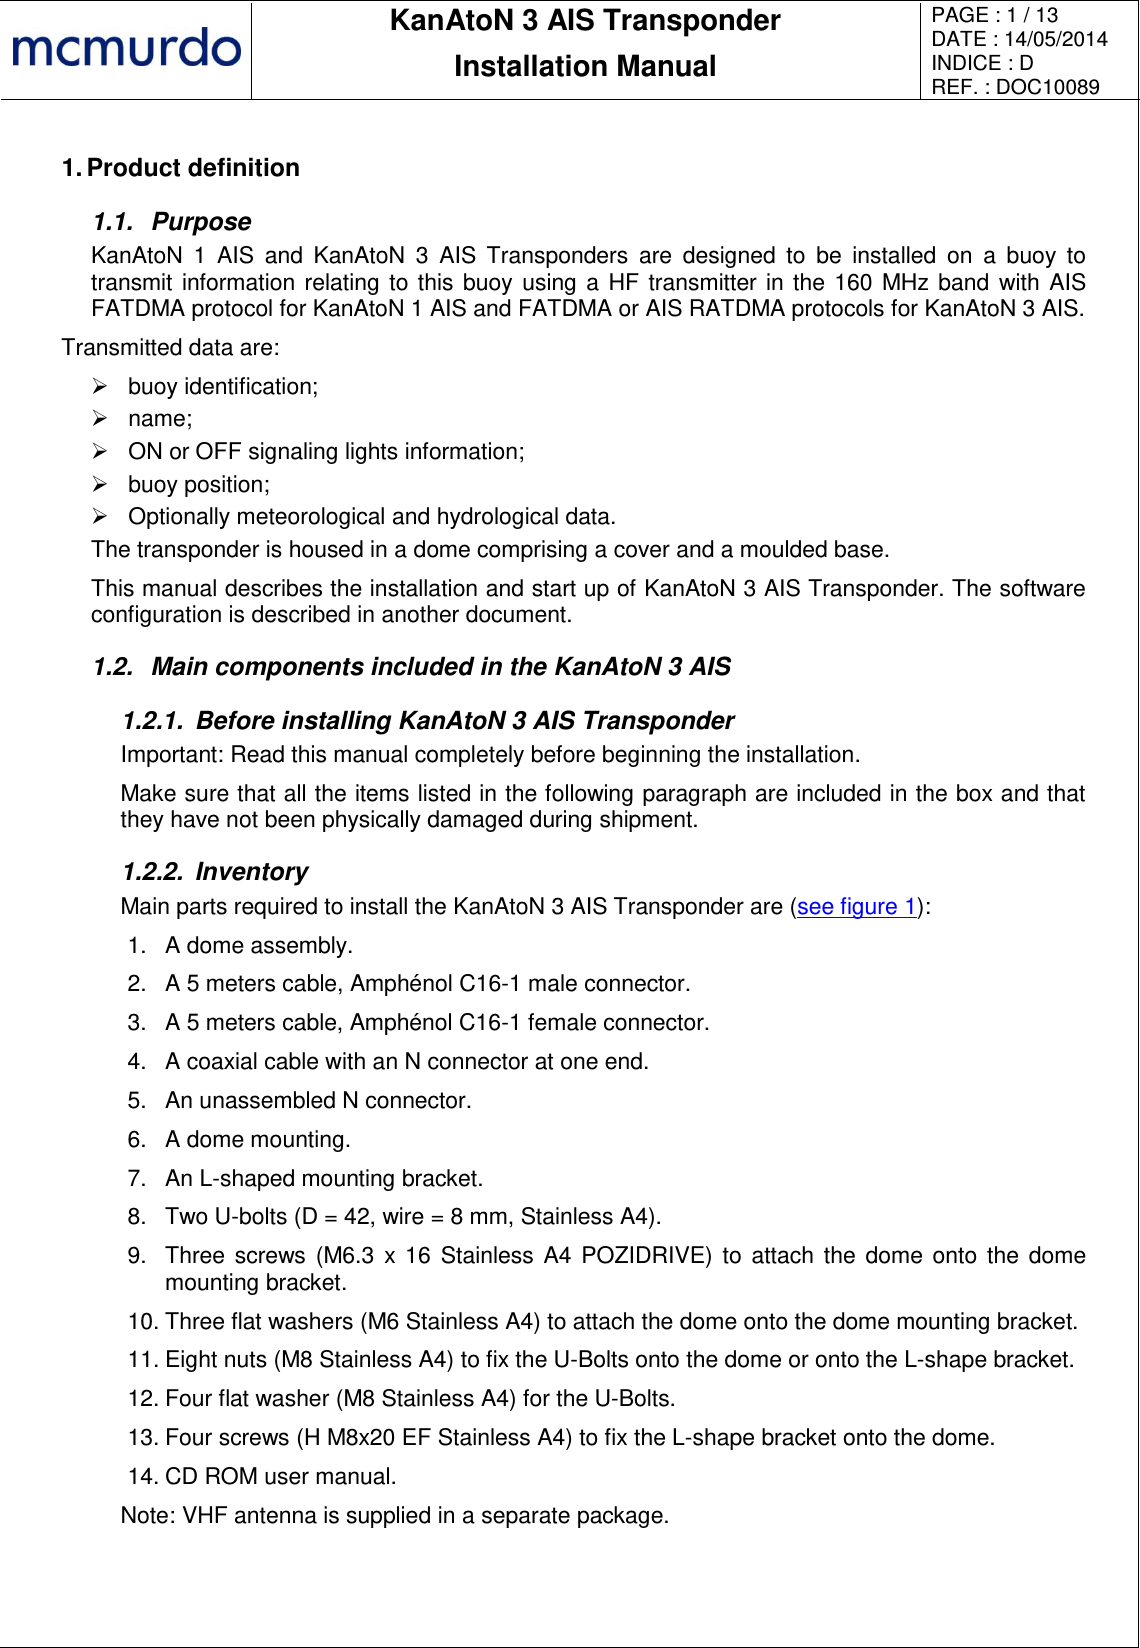       KanAtoN 3 AIS Transponder Installation Manual PAGE : 1 / 13 DATE : 14/05/2014 INDICE : D REF. : DOC10089   1. Product definition 1.1.  Purpose KanAtoN  1  AIS  and  KanAtoN  3  AIS  Transponders  are  designed  to  be  installed  on  a  buoy  to transmit information relating to this buoy using a HF transmitter in the 160 MHz band with AIS FATDMA protocol for KanAtoN 1 AIS and FATDMA or AIS RATDMA protocols for KanAtoN 3 AIS. Transmitted data are:   buoy identification;   name;   ON or OFF signaling lights information;   buoy position;   Optionally meteorological and hydrological data. The transponder is housed in a dome comprising a cover and a moulded base. This manual describes the installation and start up of KanAtoN 3 AIS Transponder. The software configuration is described in another document. 1.2.  Main components included in the KanAtoN 3 AIS 1.2.1.  Before installing KanAtoN 3 AIS Transponder Important: Read this manual completely before beginning the installation. Make sure that all the items listed in the following paragraph are included in the box and that they have not been physically damaged during shipment.  1.2.2.  Inventory Main parts required to install the KanAtoN 3 AIS Transponder are (see figure 1): 1.  A dome assembly. 2. A 5 meters cable, Amphénol C16-1 male connector. 3.  A 5 meters cable, Amphénol C16-1 female connector. 4.  A coaxial cable with an N connector at one end. 5.  An unassembled N connector. 6.  A dome mounting. 7.  An L-shaped mounting bracket. 8.  Two U-bolts (D = 42, wire = 8 mm, Stainless A4). 9.  Three screws (M6.3  x 16  Stainless A4 POZIDRIVE) to  attach  the dome onto the dome mounting bracket. 10. Three flat washers (M6 Stainless A4) to attach the dome onto the dome mounting bracket. 11. Eight nuts (M8 Stainless A4) to fix the U-Bolts onto the dome or onto the L-shape bracket. 12. Four flat washer (M8 Stainless A4) for the U-Bolts. 13. Four screws (H M8x20 EF Stainless A4) to fix the L-shape bracket onto the dome. 14. CD ROM user manual. Note: VHF antenna is supplied in a separate package. 